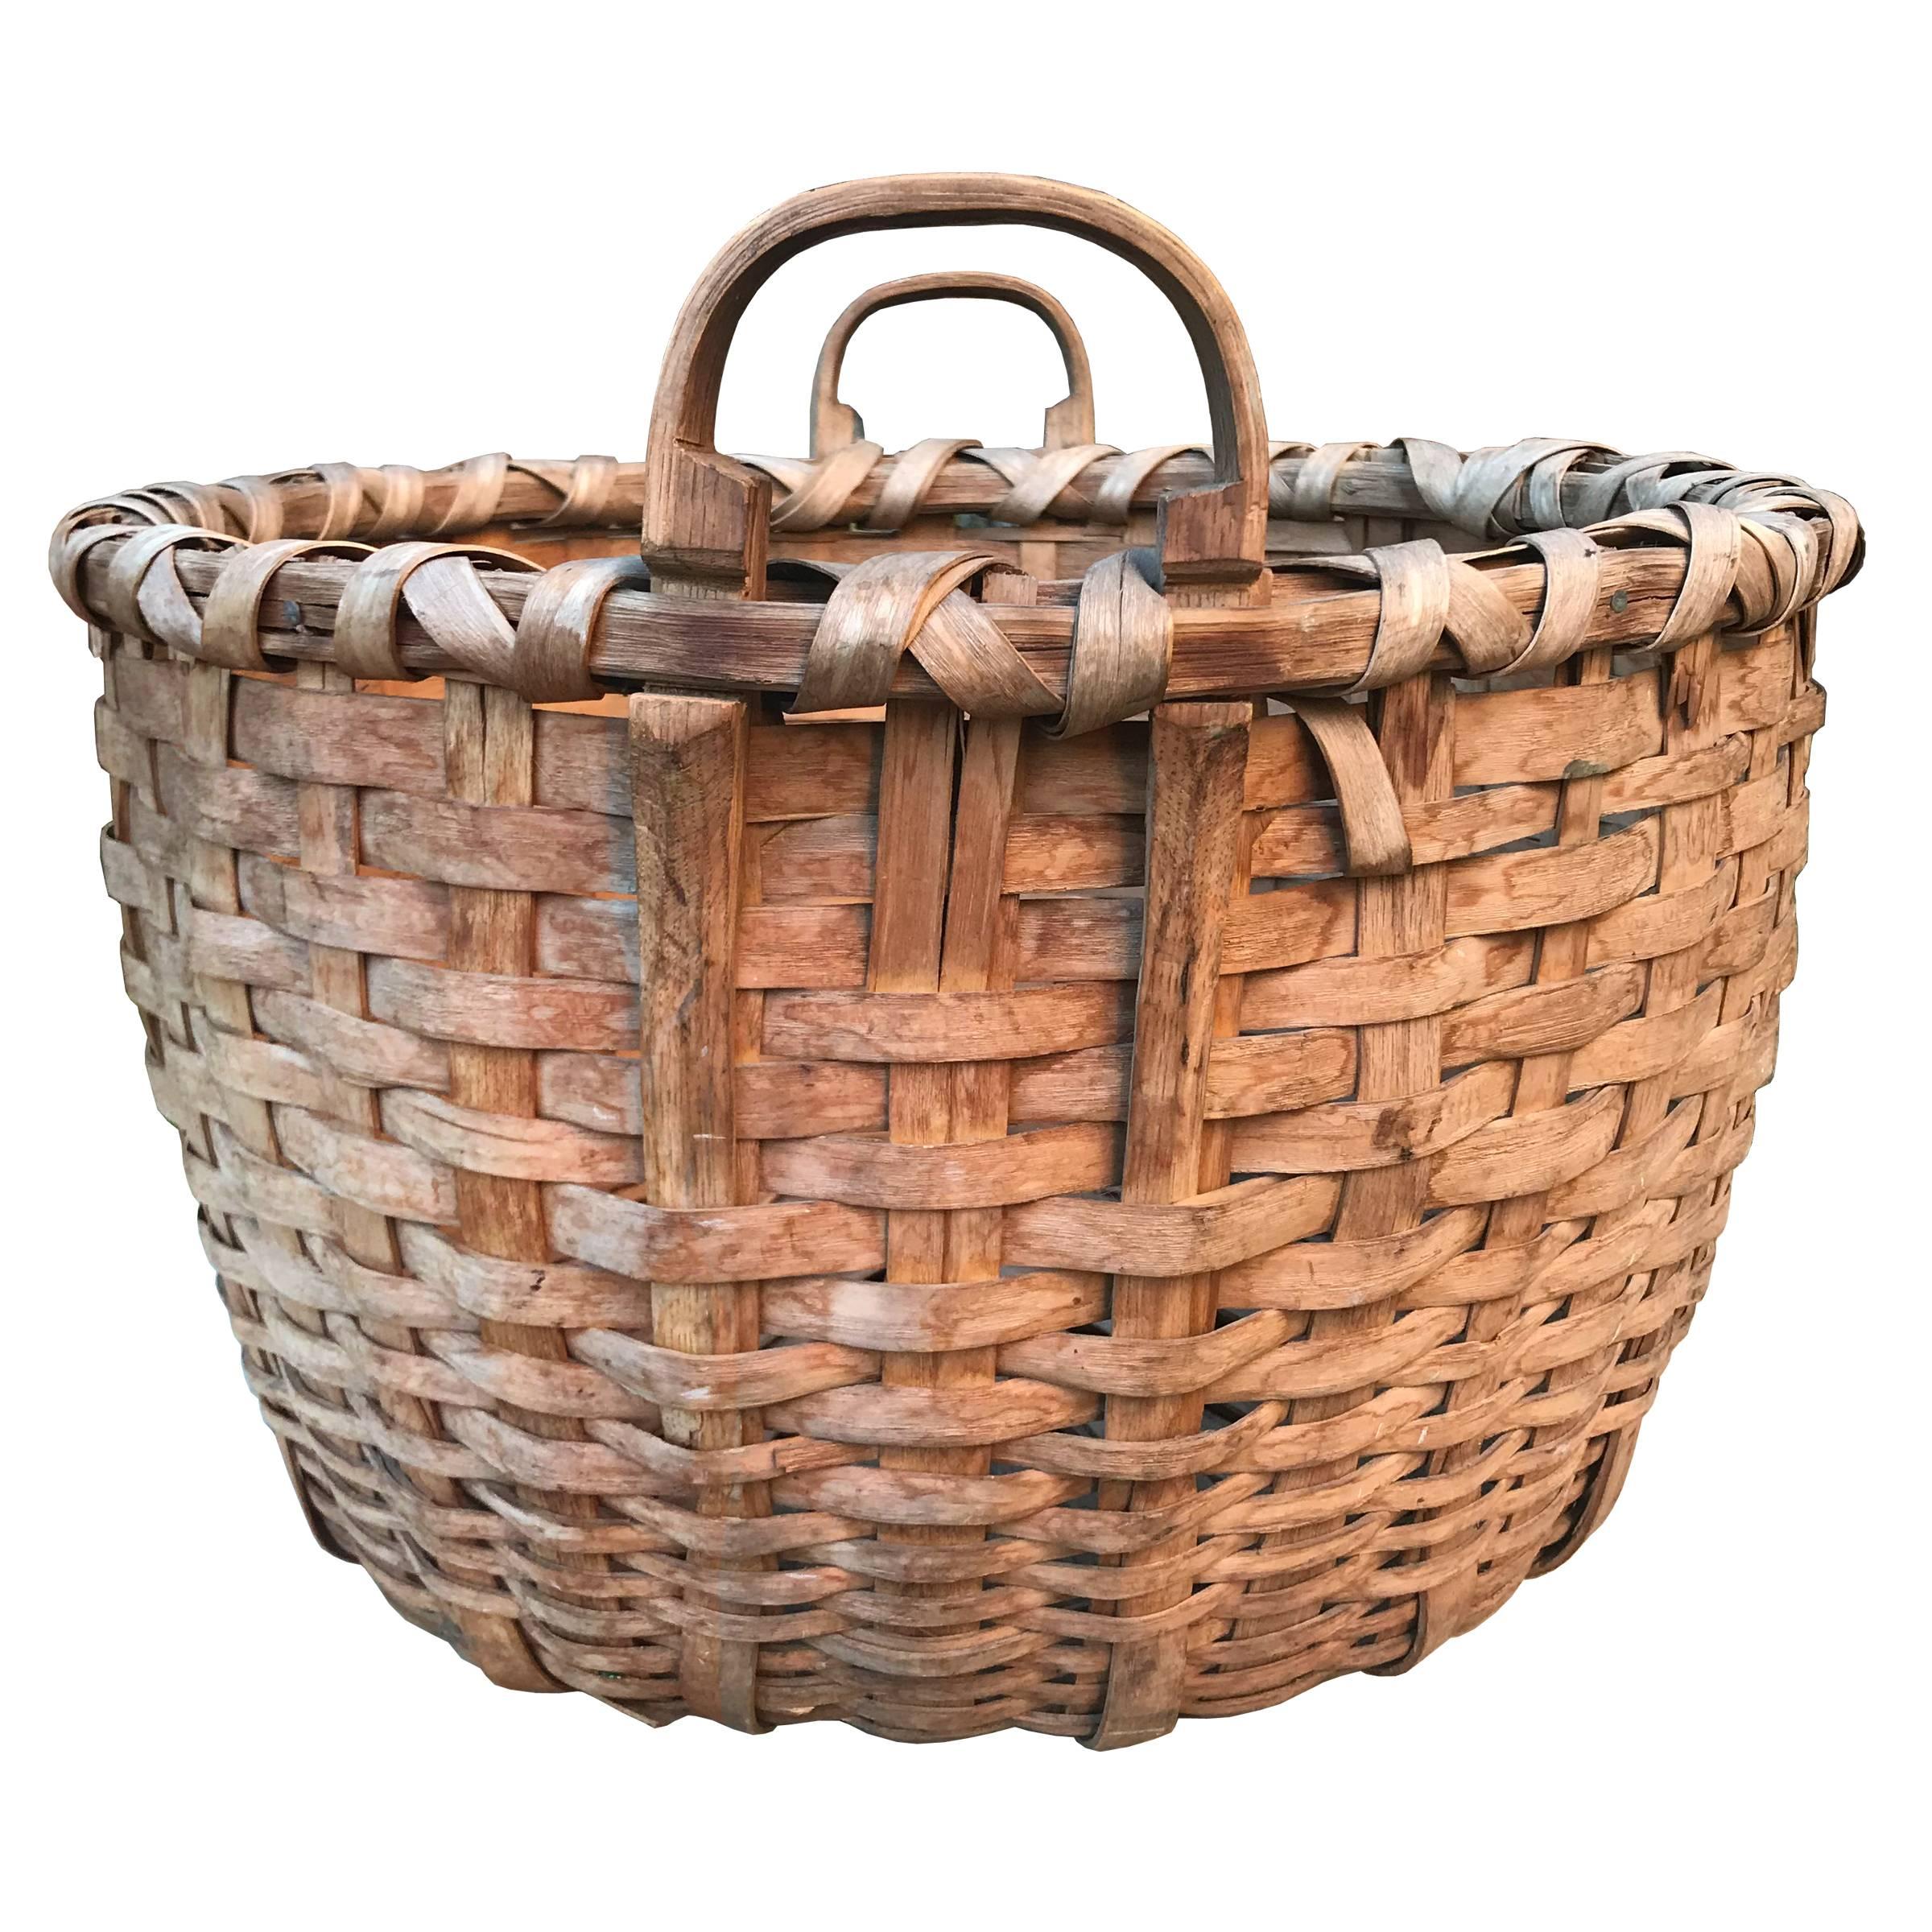 A fantastic 19th century woven splint oak bushel basket with two bentwood handles, double rim, and a nice wide base. Found in New England. Purchased because it's beautiful!